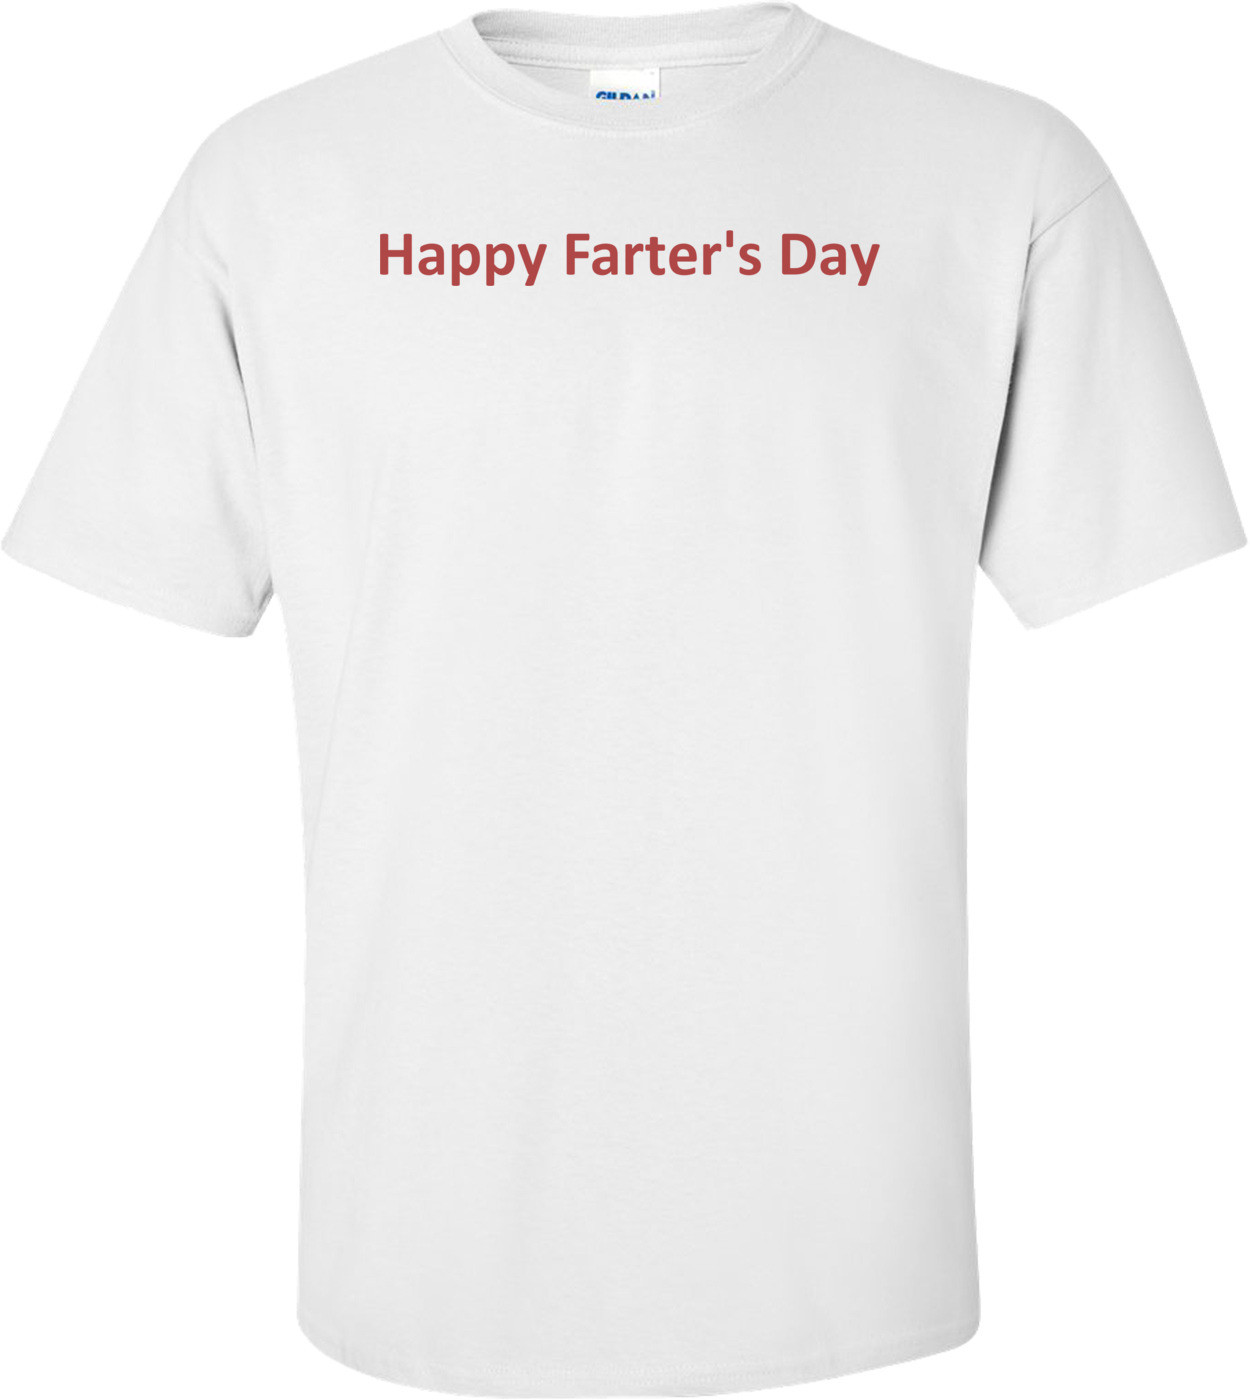 Happy Farter's Day T-Shirt